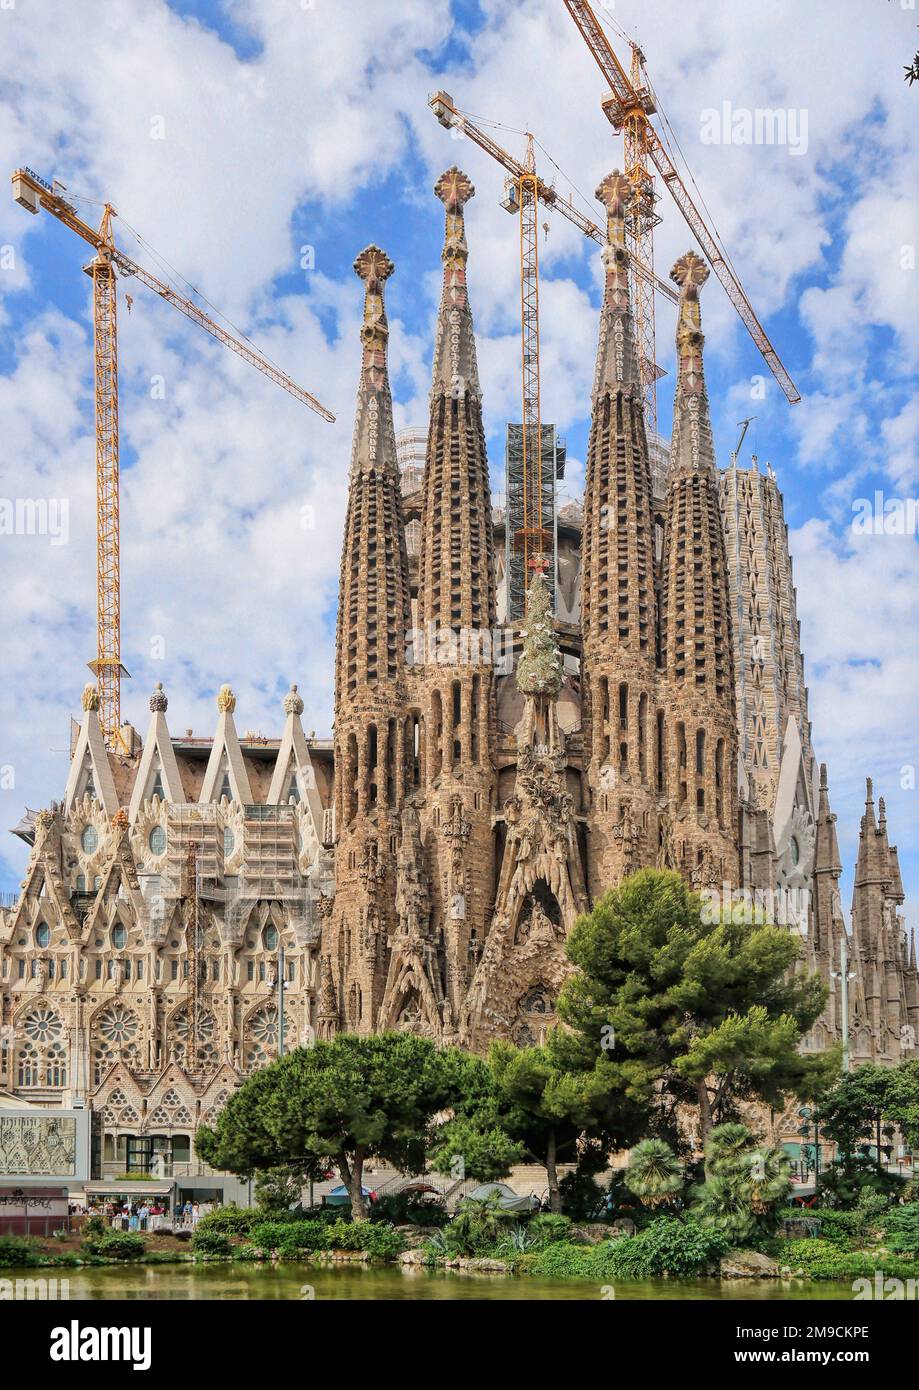 Barcelona, Spain - May 2018: La Sagrada Familia - the impressive cathedral designed by Gaudi, which is being build since 19 March 1882 Stock Photo